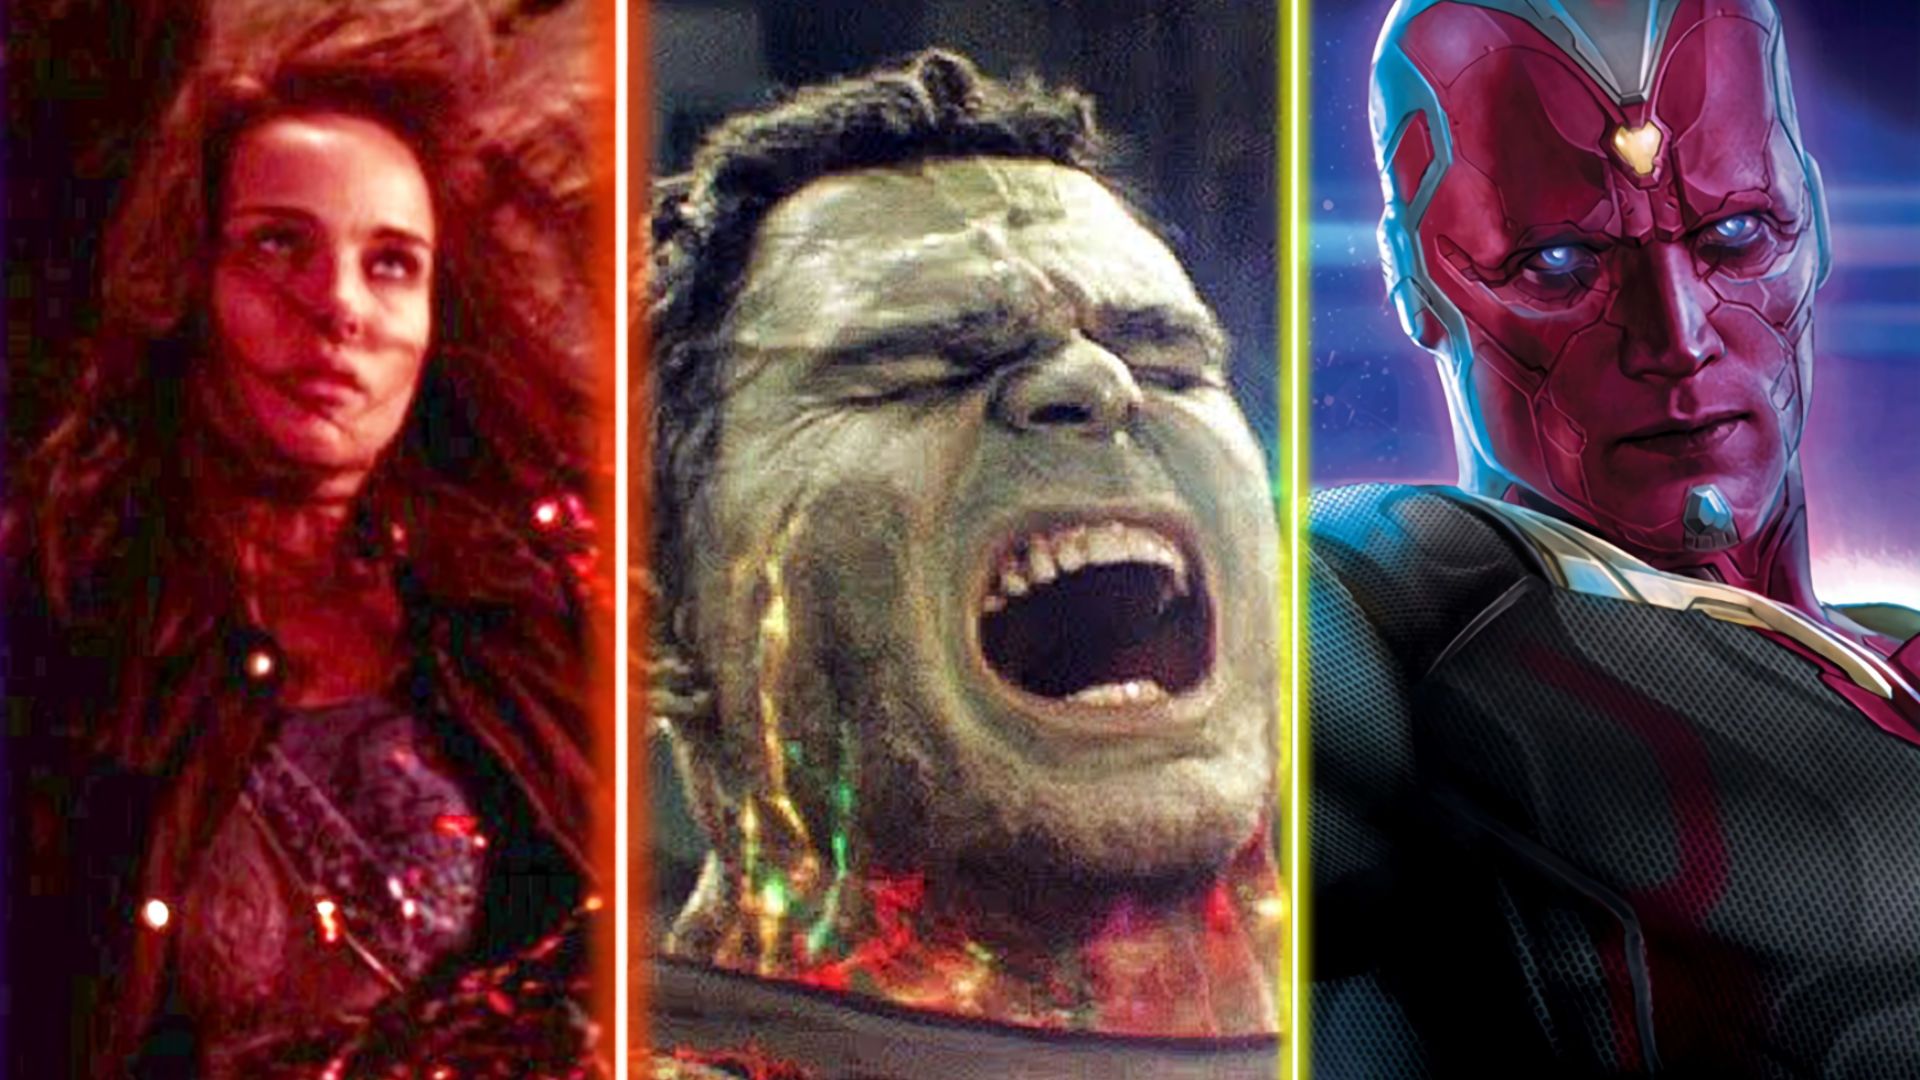 The Collector's Fate In Avengers: Infinity War Has Finally Been Revealed